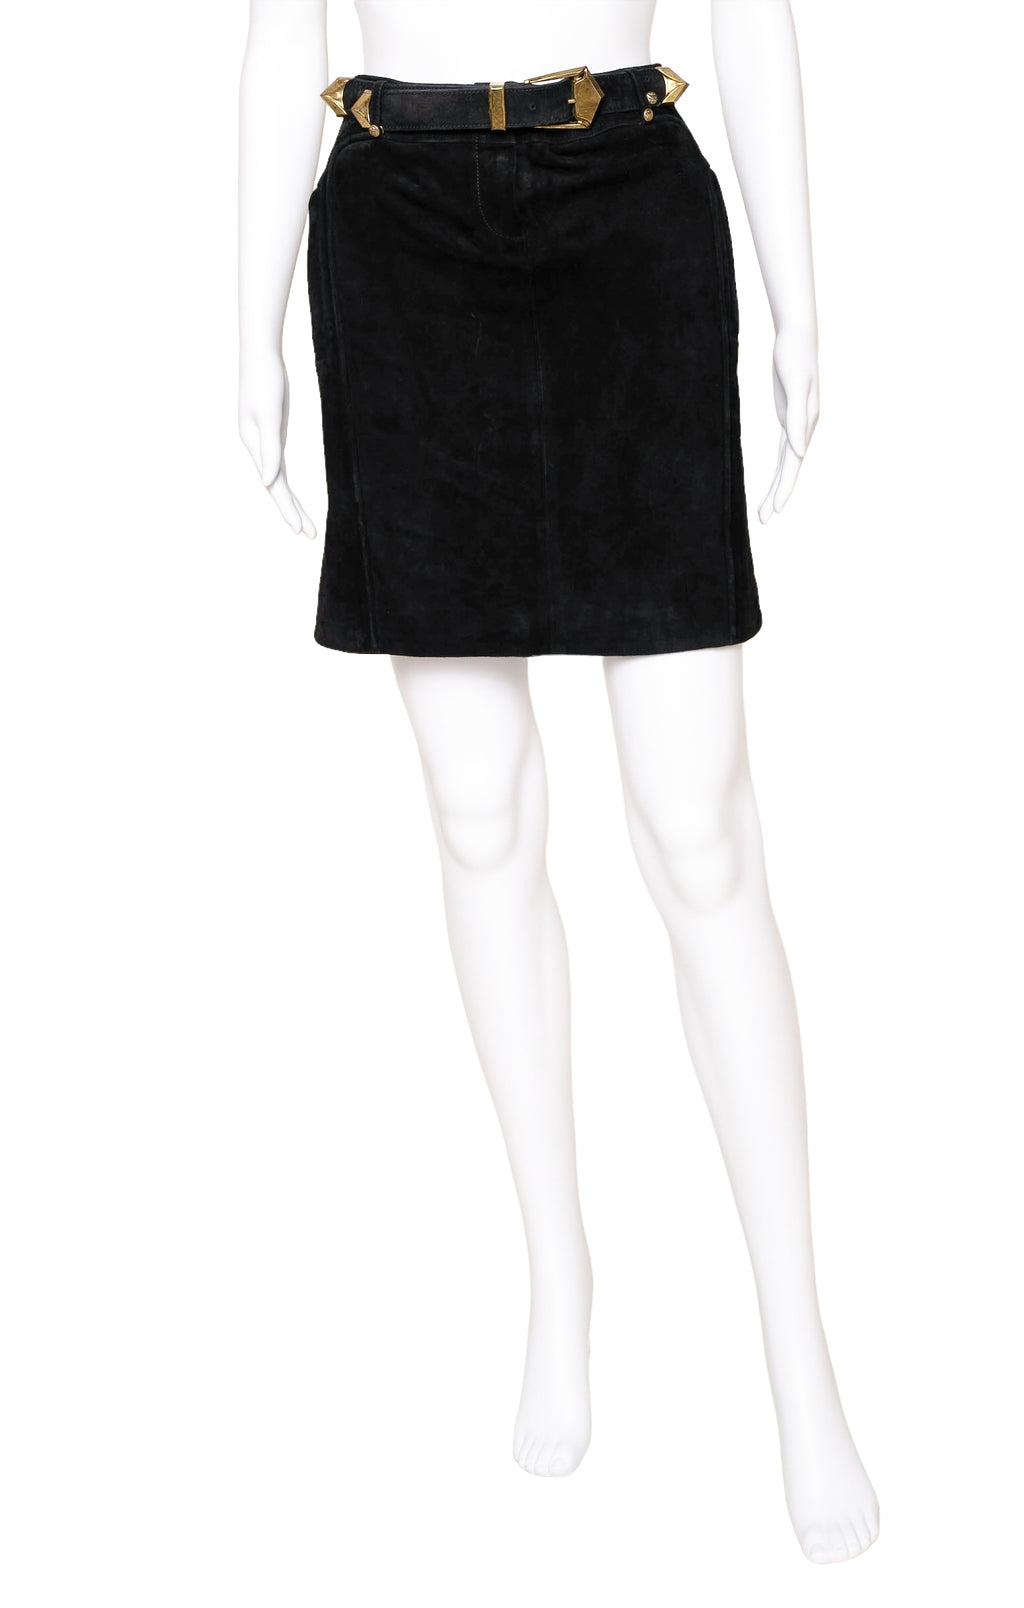 BALMAIN (NEW) with tags Skirt Size: FR 42 / Comparable to US L-XL